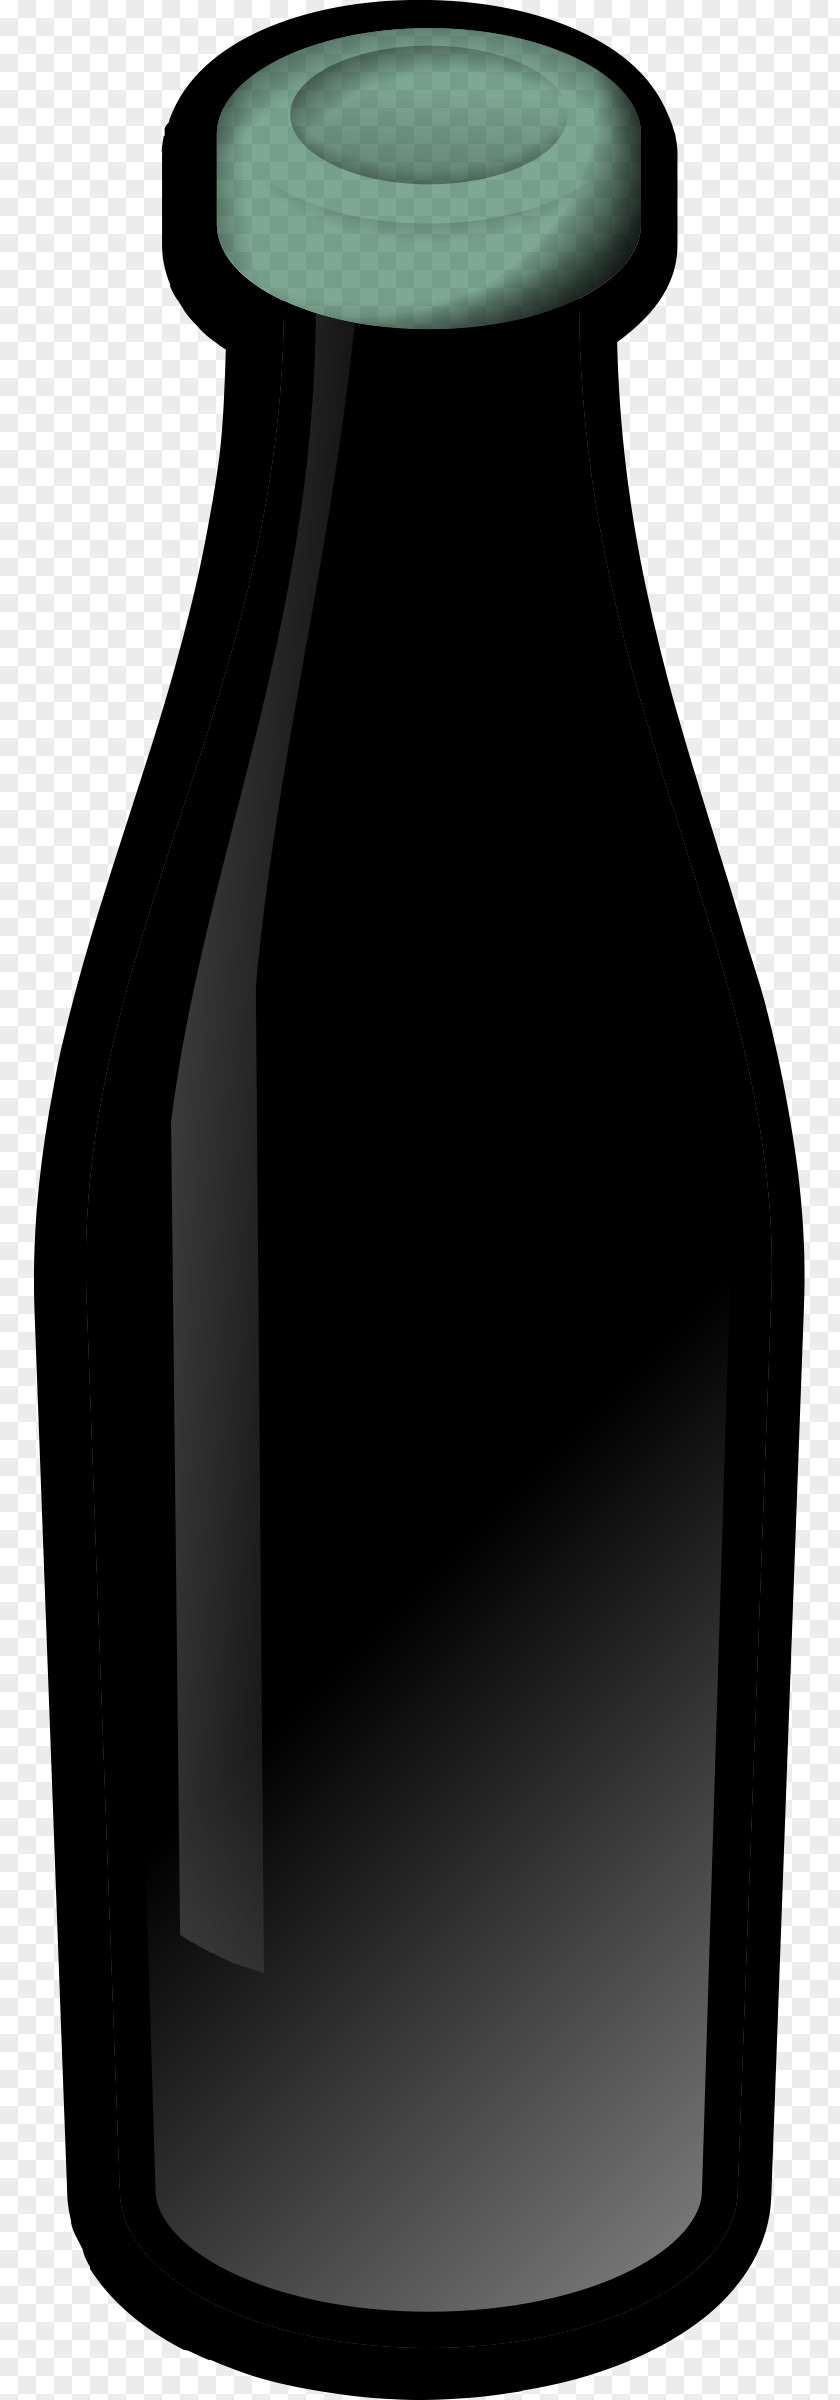 Glass Bottle Recycling PNG